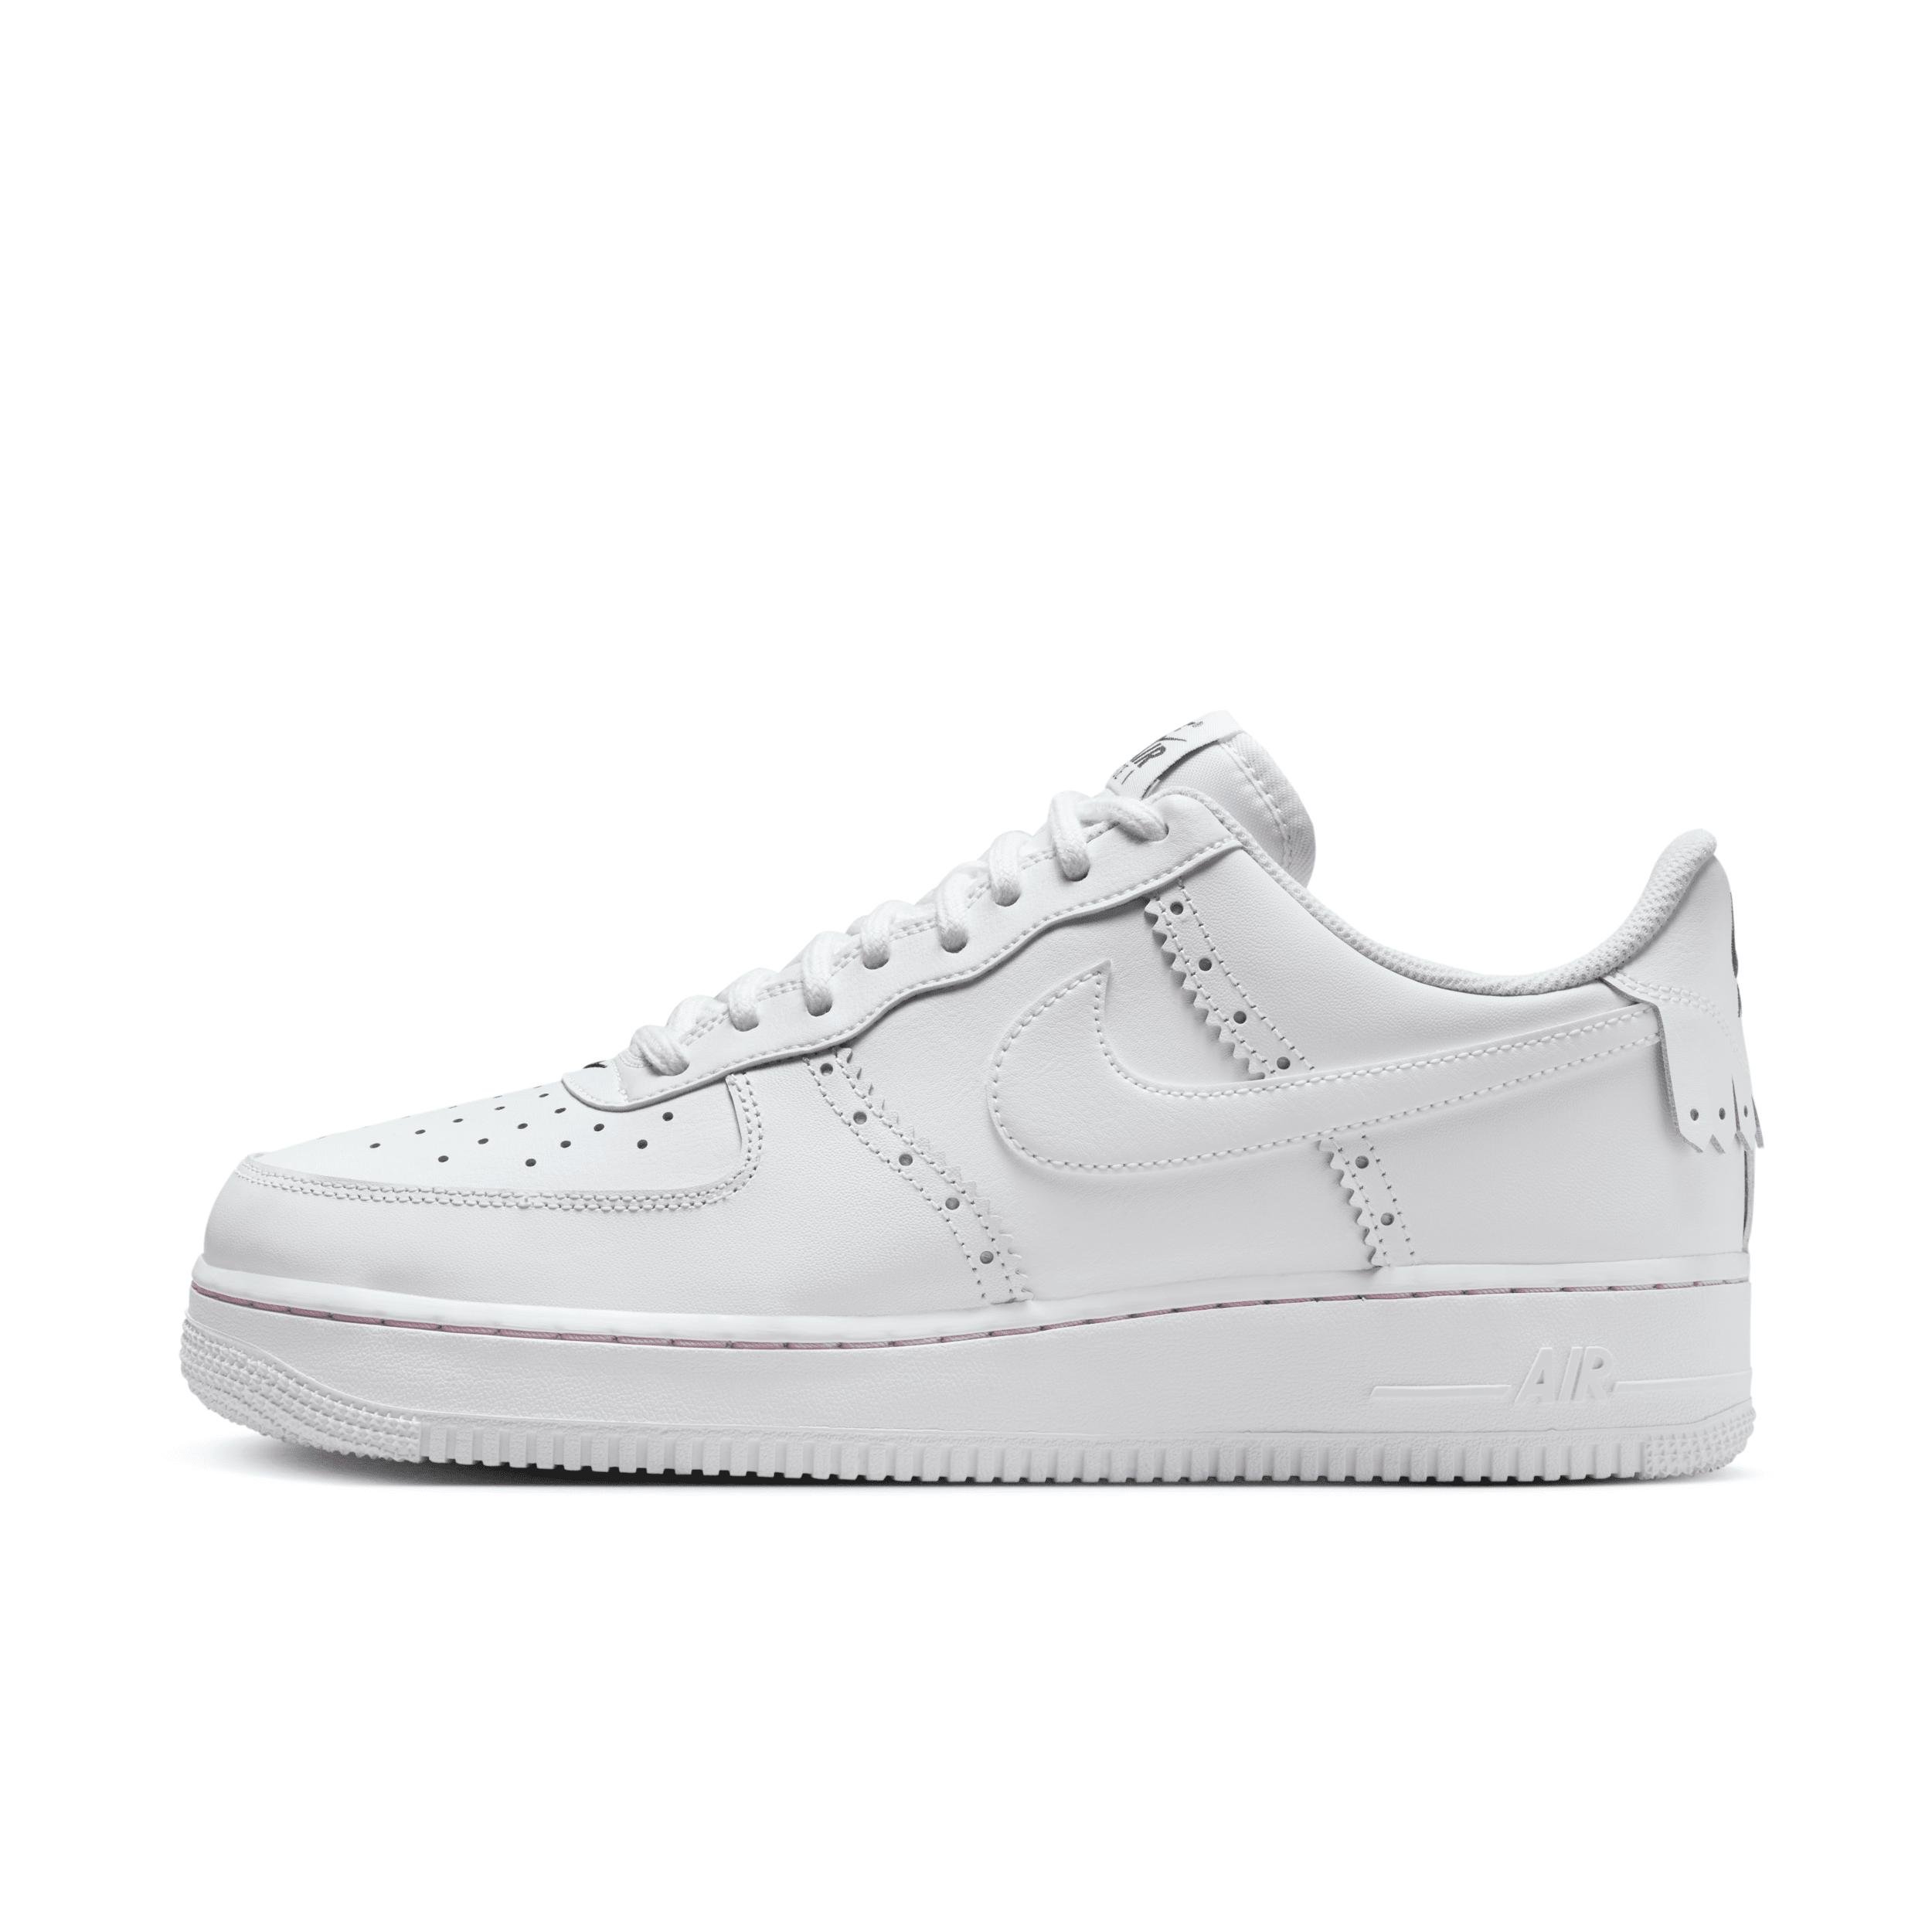 Nike Men's Air Force 1 '07 LV8 Shoes by NIKE